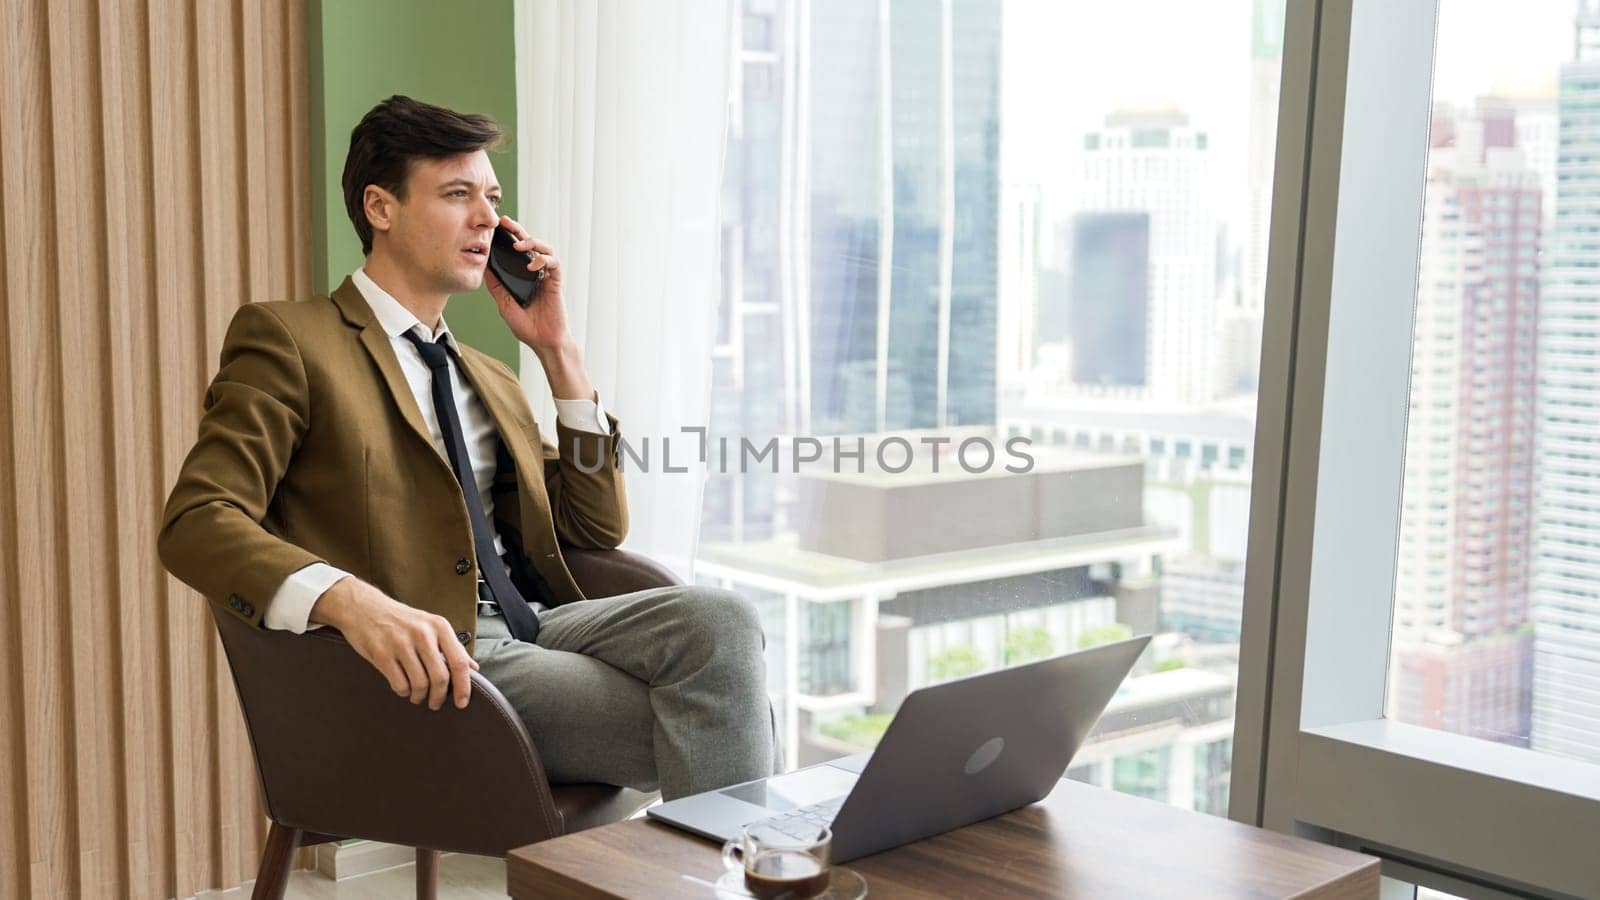 Businessman sitting on furniture working on laptop at ornamented corporate by biancoblue